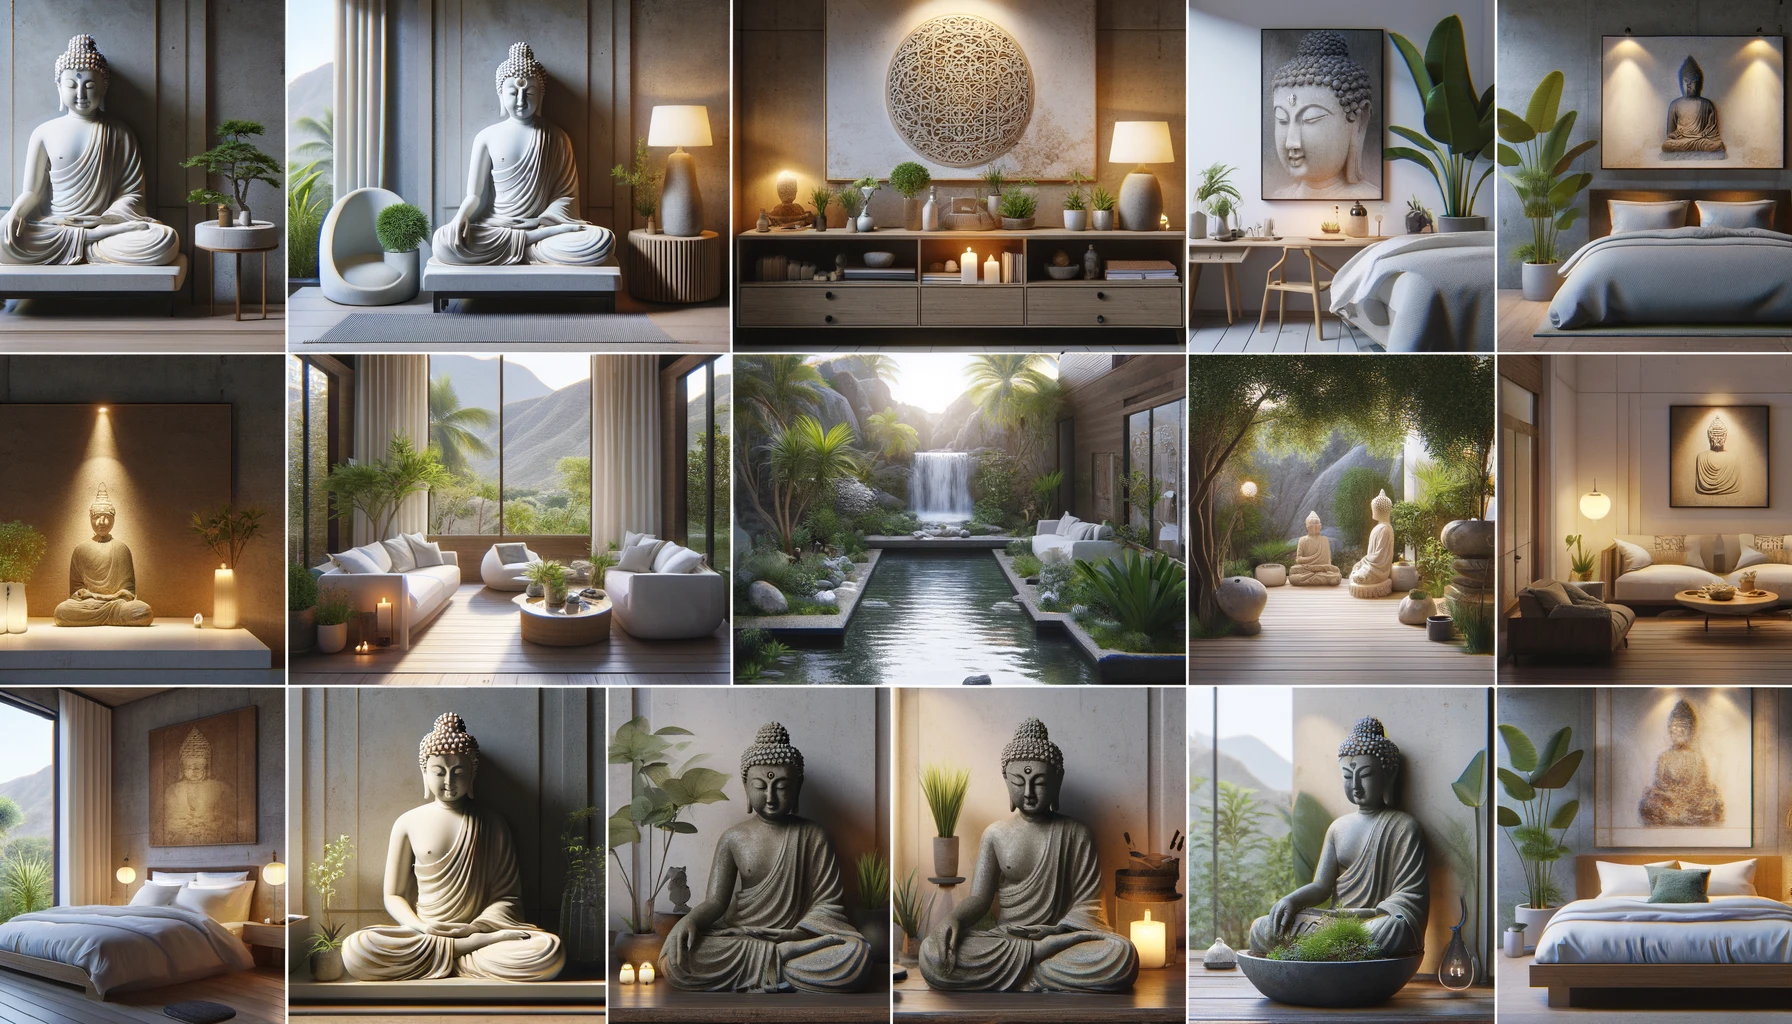 A landscape image as a collage showcasing unique Buddha statue decor ideas for every nook of a home. This comprehensive visual represents serene and harmonious settings across various rooms, emphasizing tranquility, aesthetic appeal, and the thoughtful integration of natural elements.